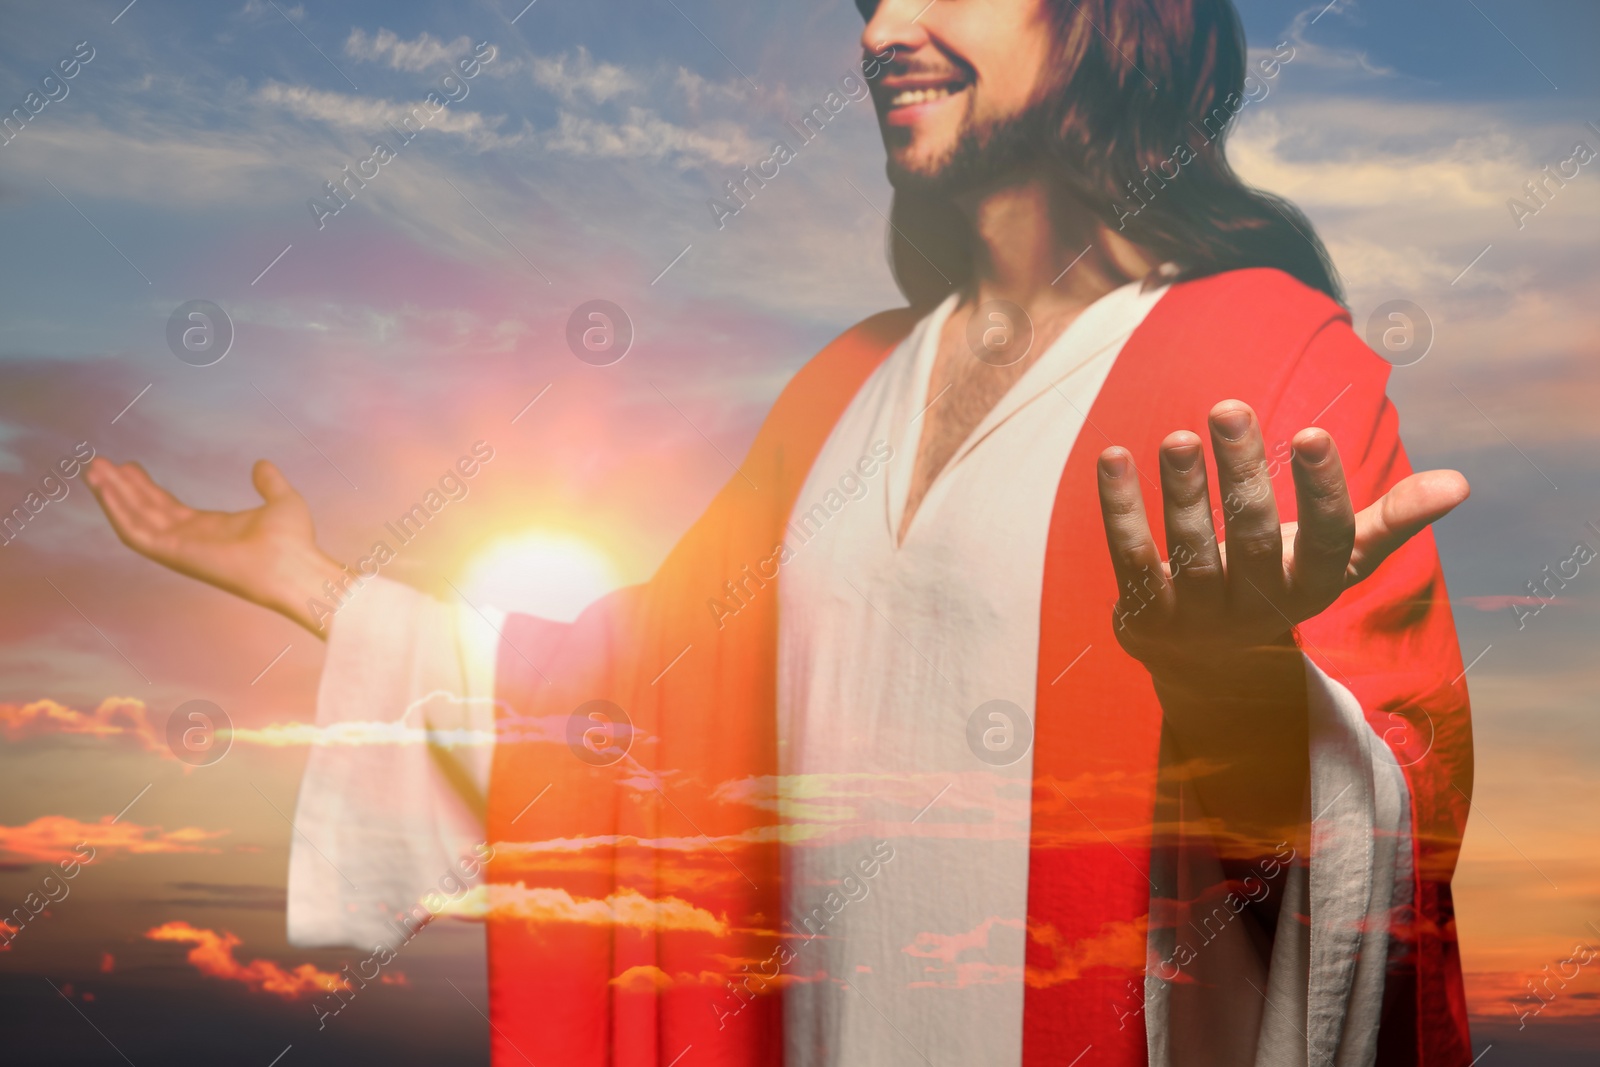 Image of Jesus Christ reaching out his hands and praying at sunset, double exposure